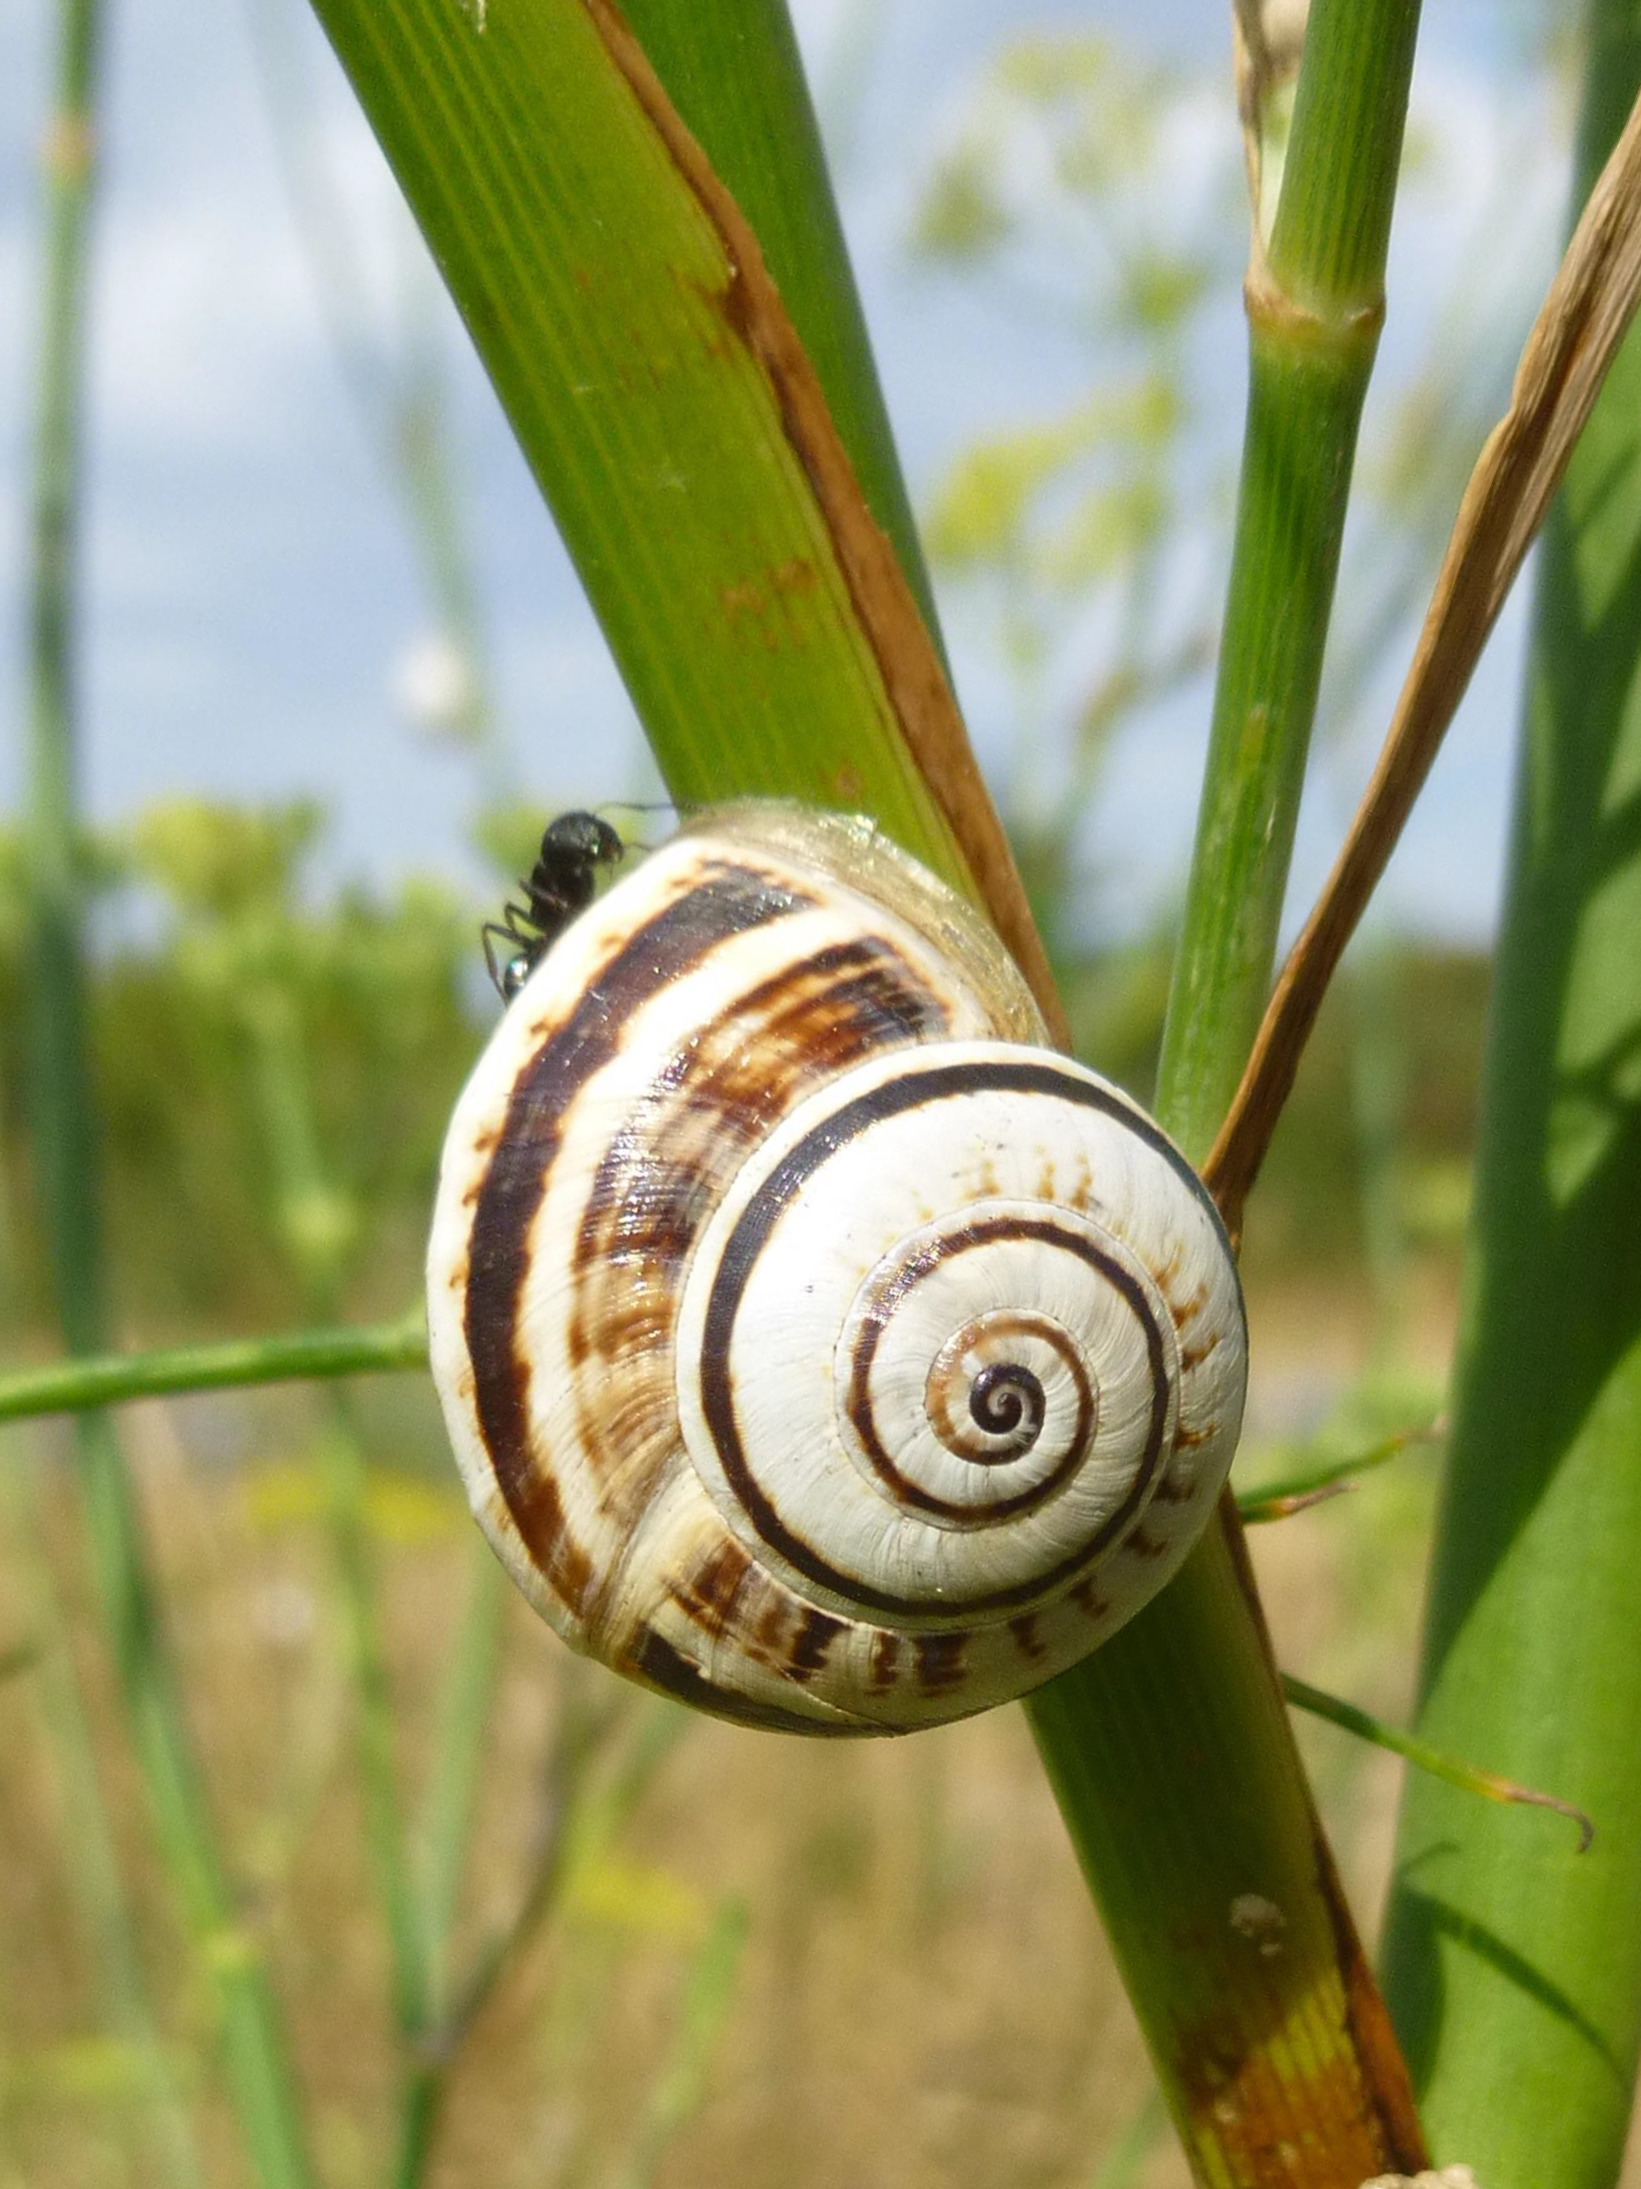 What is the best climate for snails?